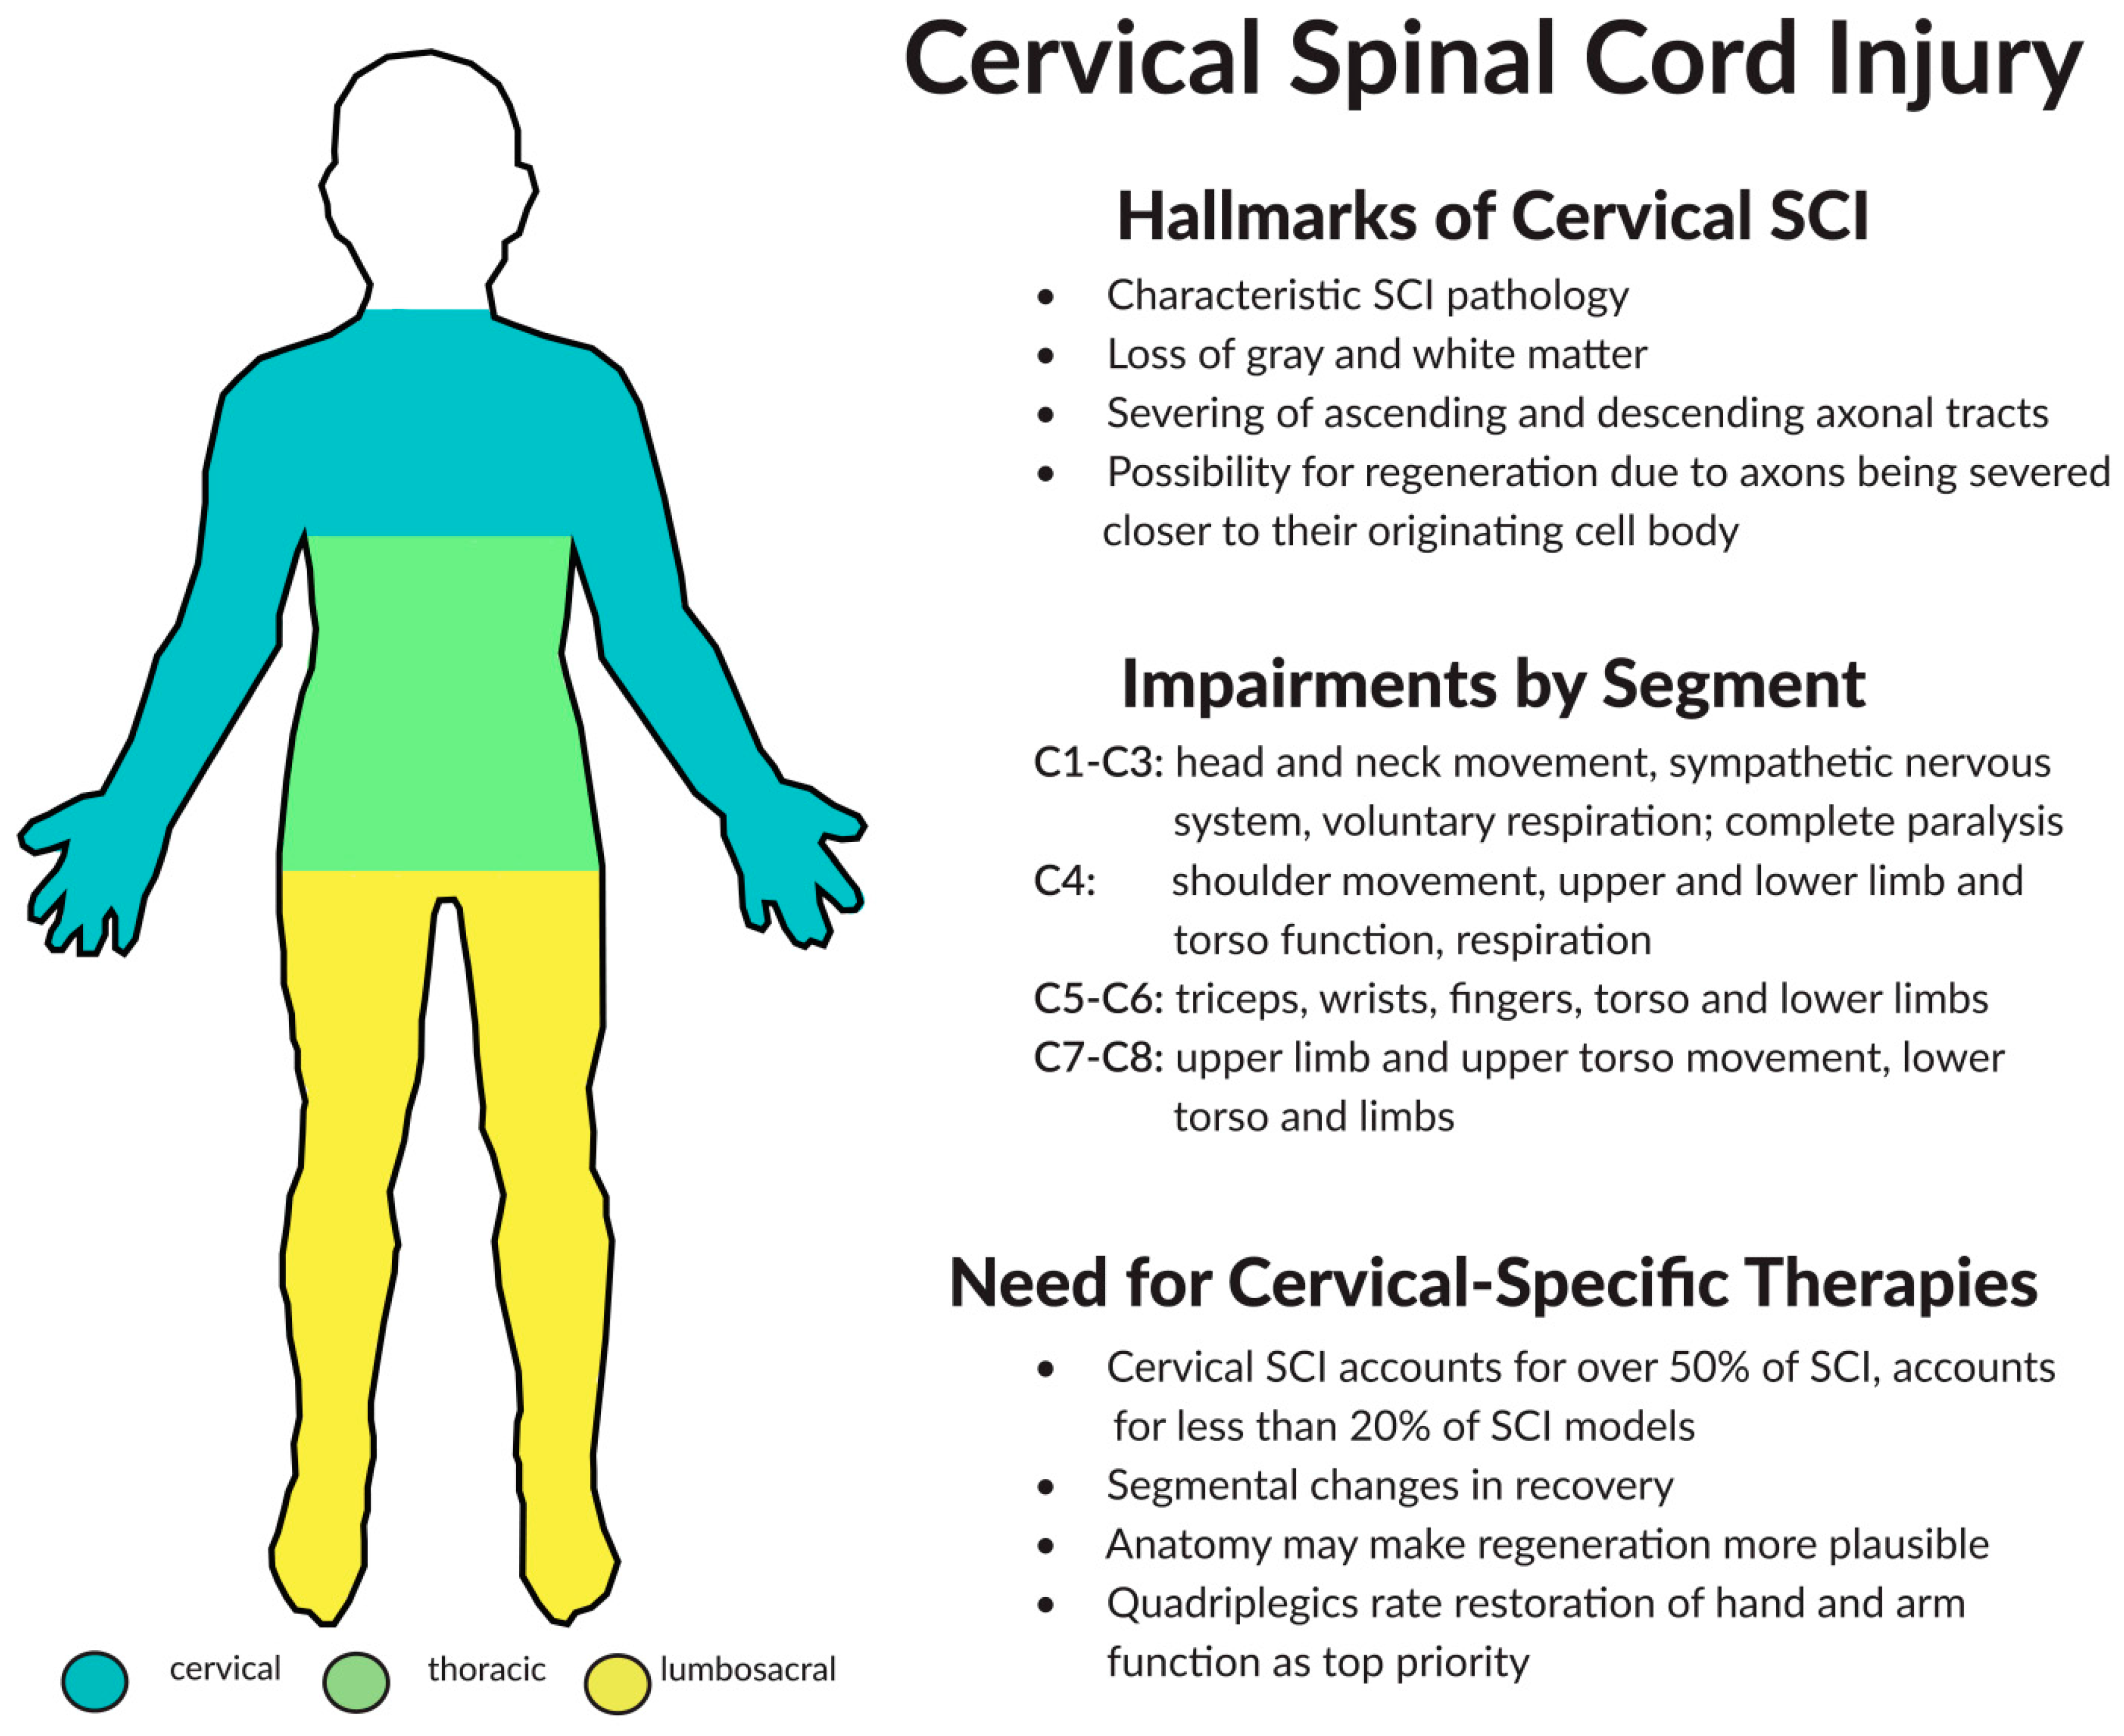 Ijms Free Full Text Induced Pluripotent Stem Cell Therapies For Cervical Spinal Cord Injury Html